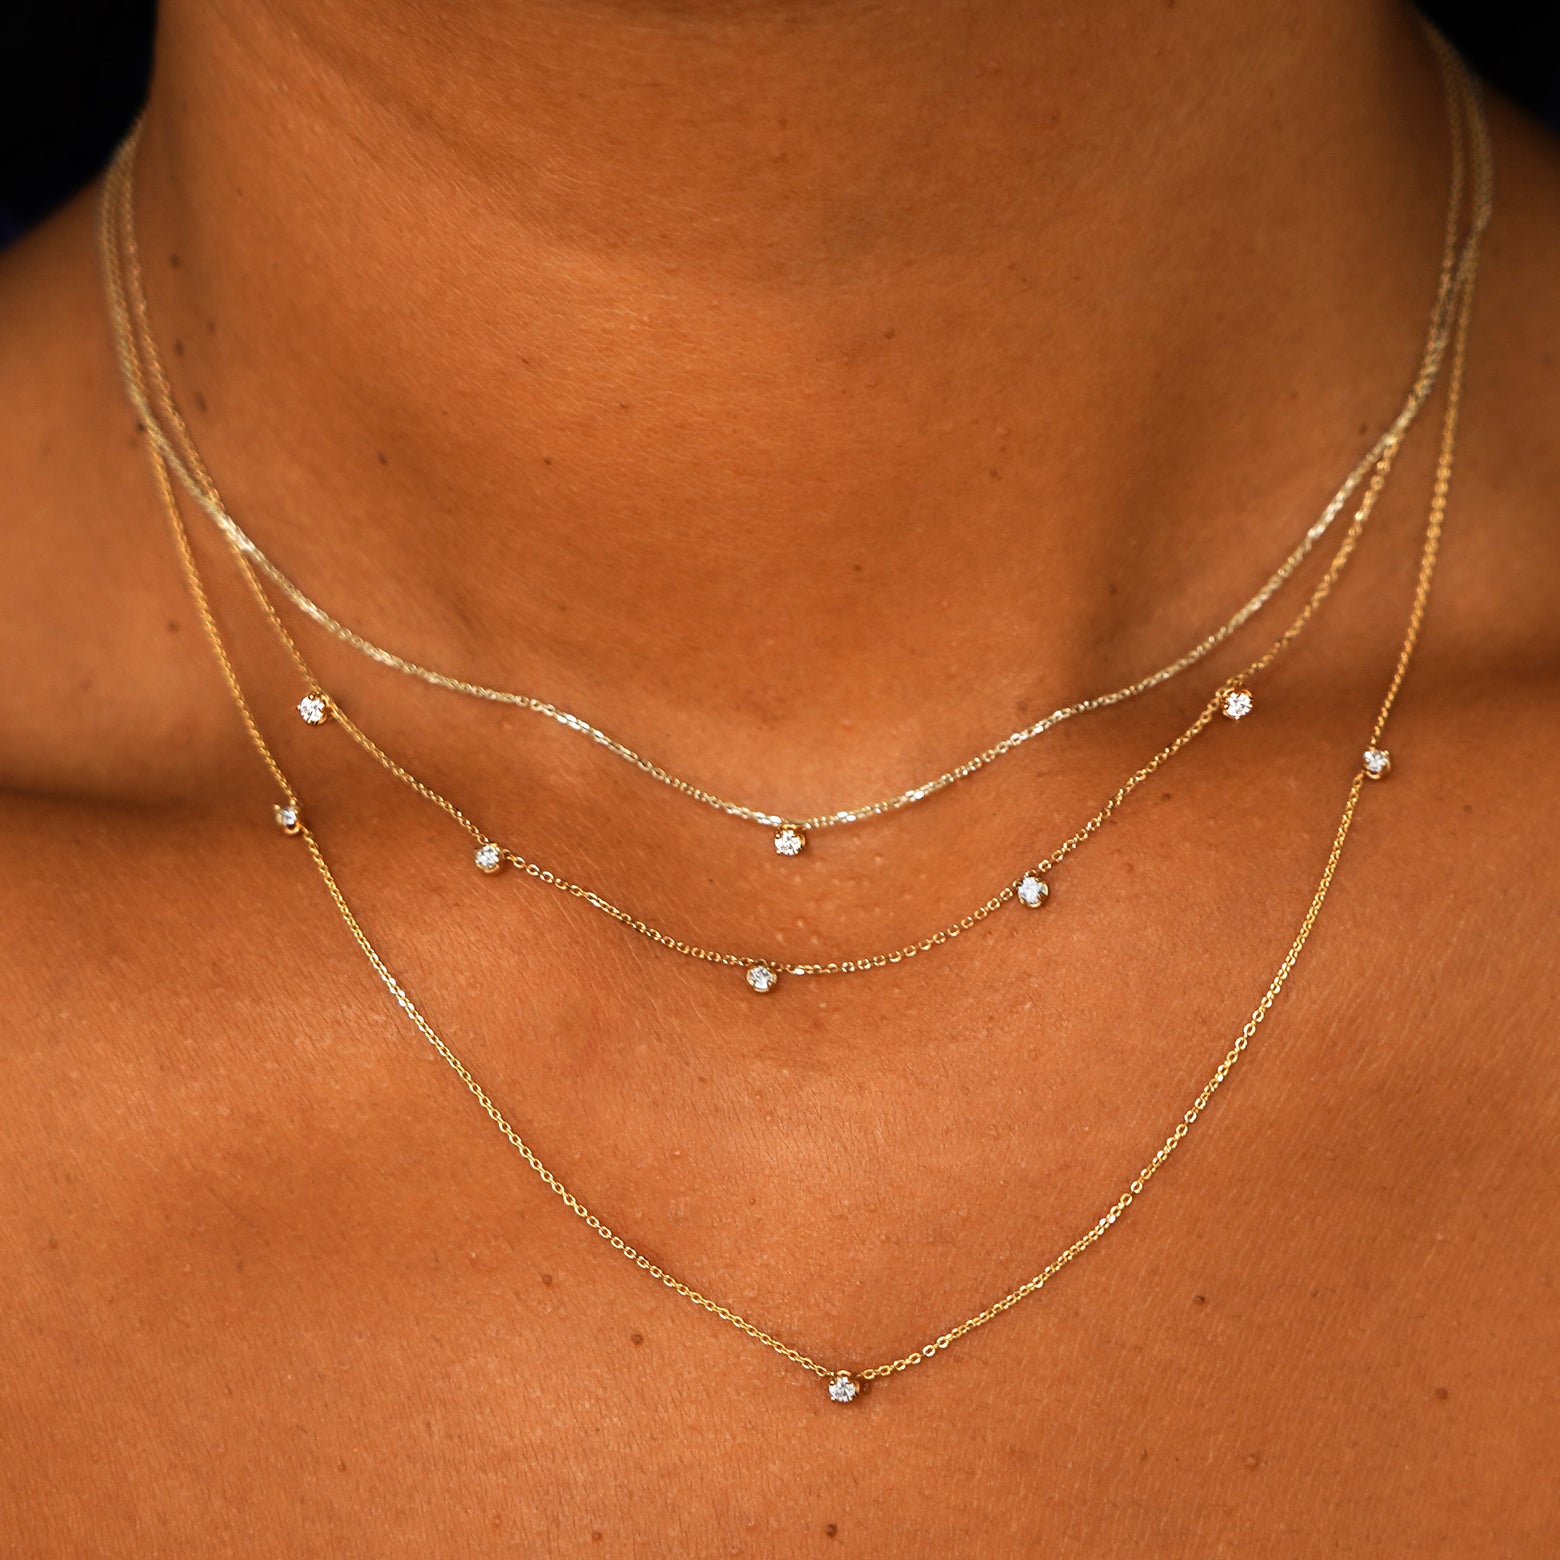 A model wearing a Diamond Cable Necklace, a 5 Diamond Cable Necklace, and 3 Diamond Cable Necklace layered 